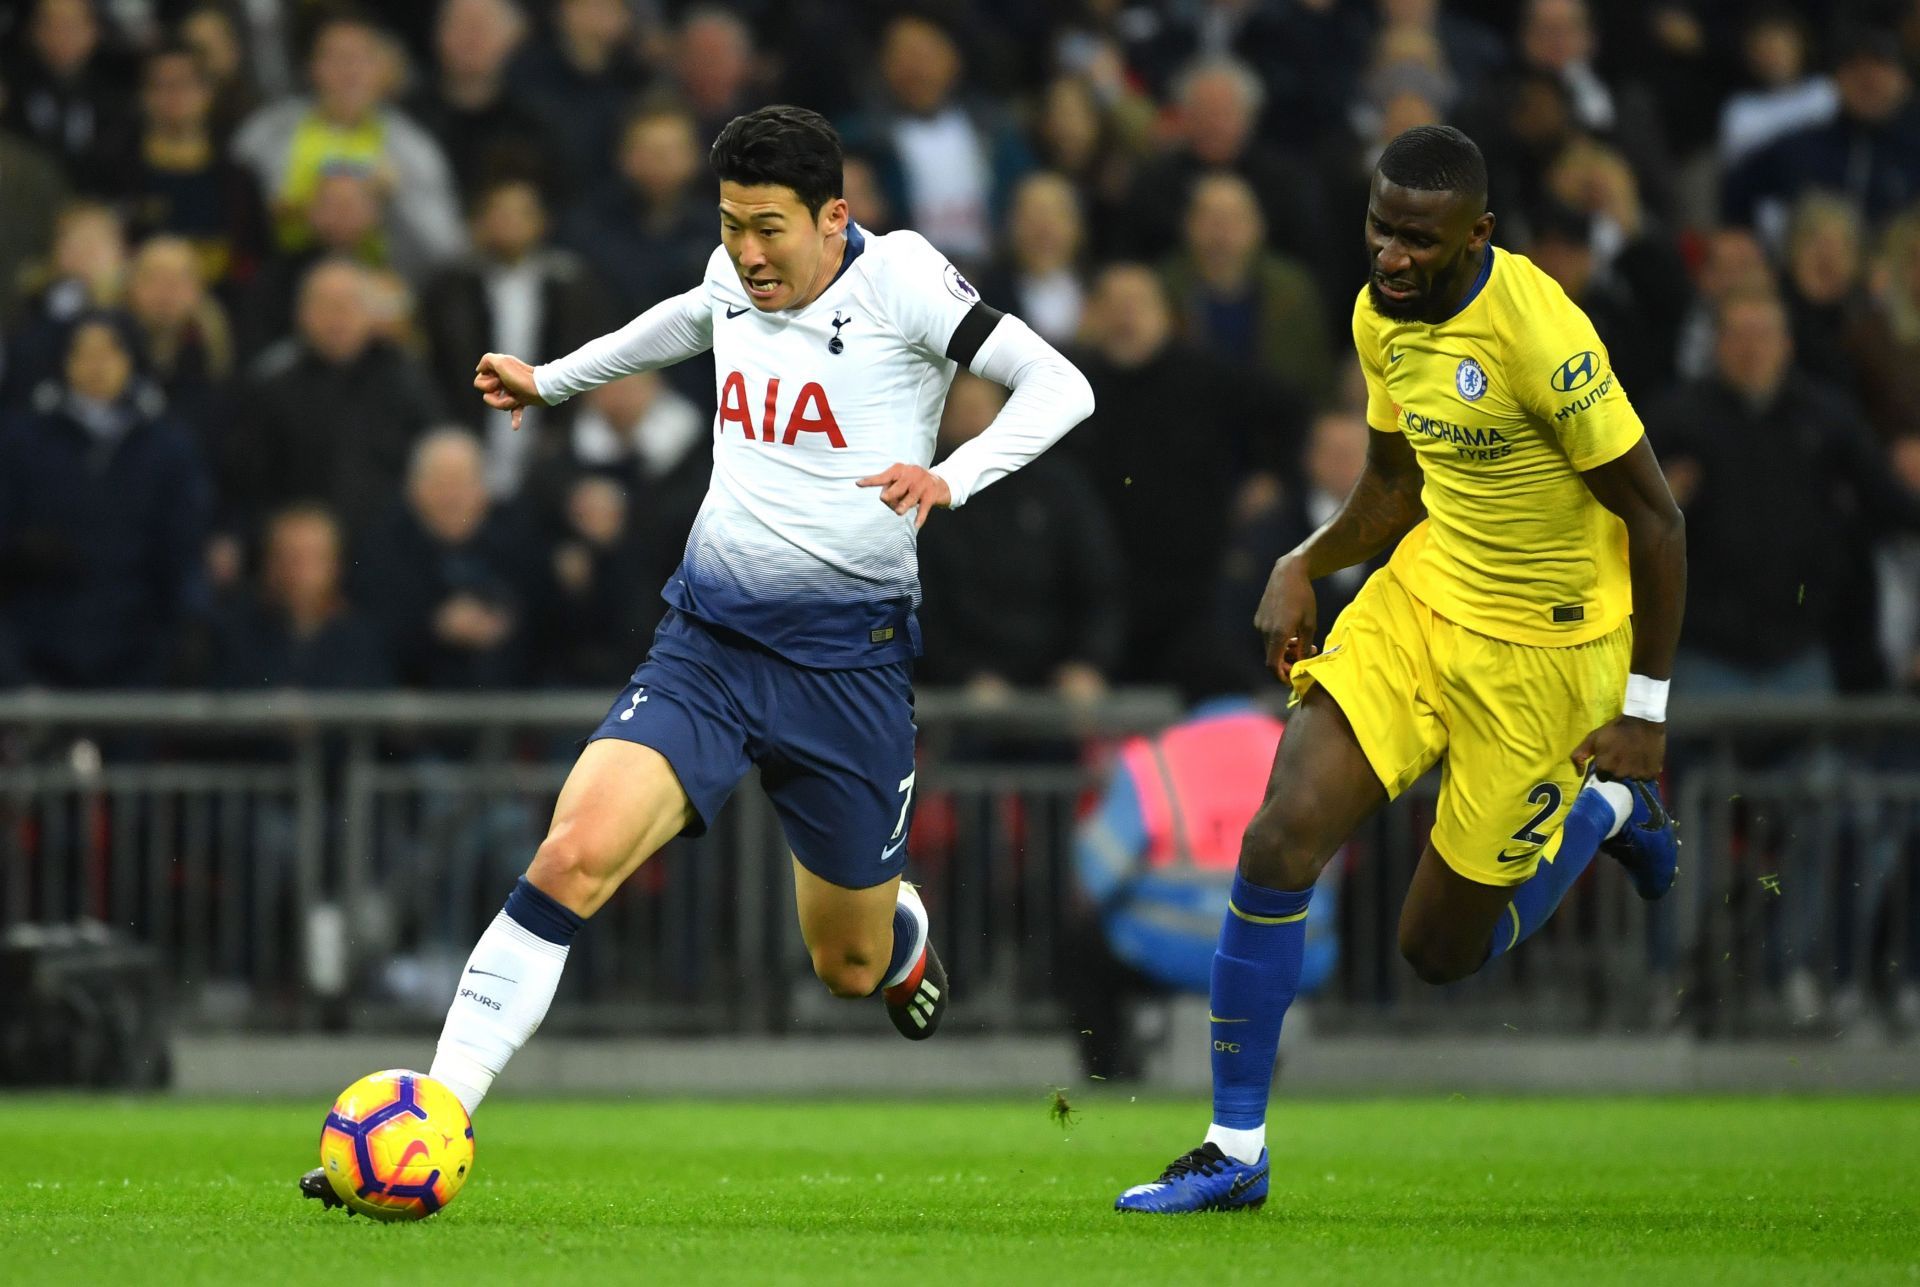 Son Heung Min challenged by Antonio Rudiger